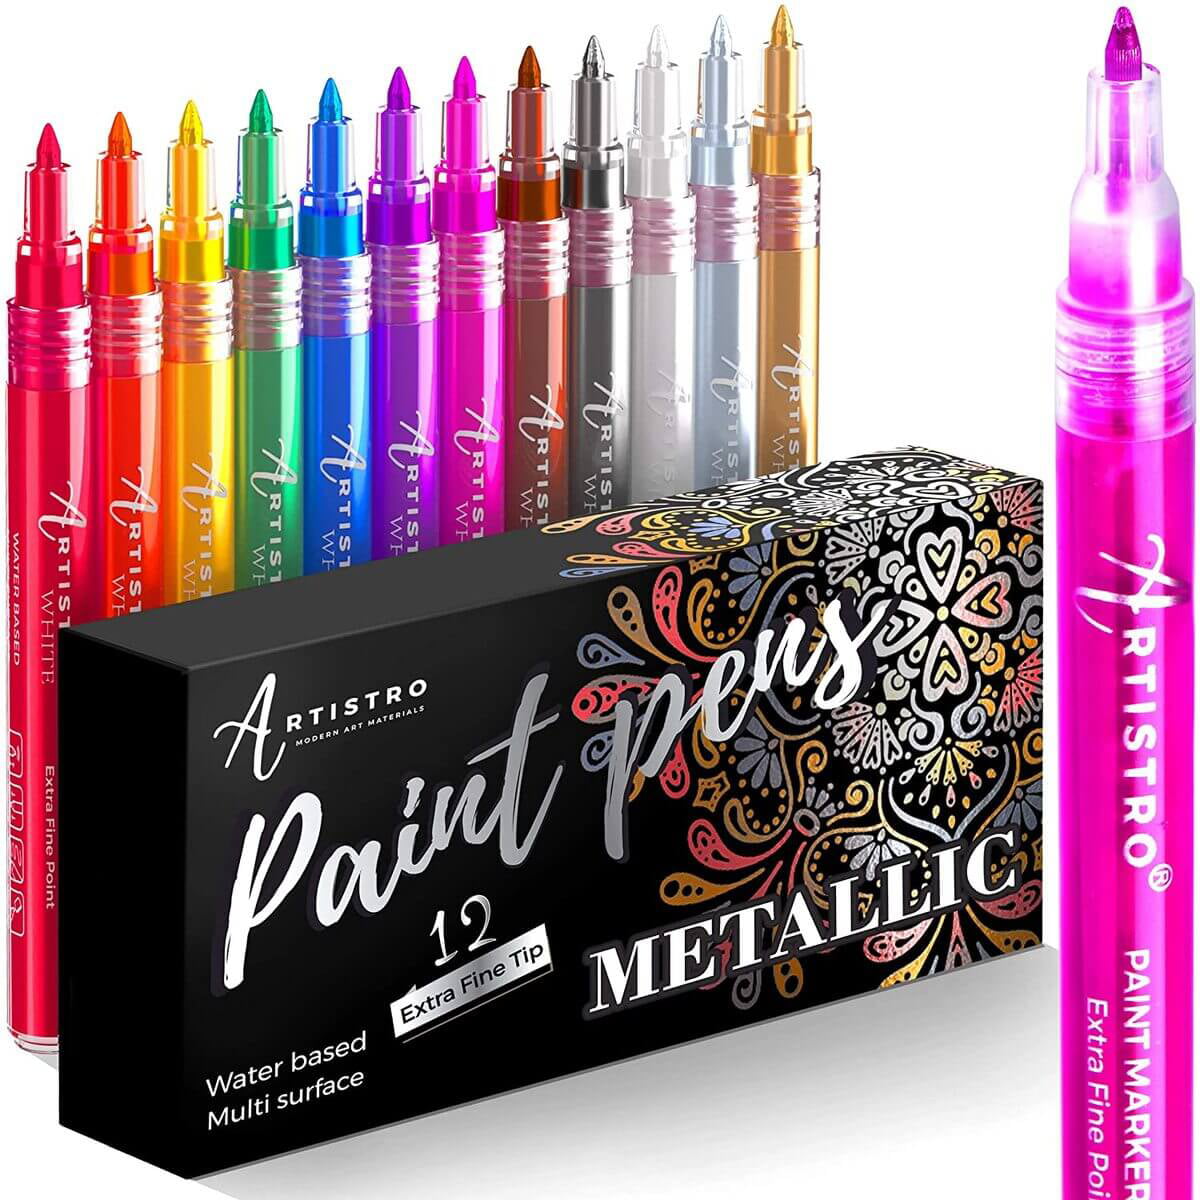 Art& Crafts and so on with 12 Assorted Colors Rubber Wood Glass Premium Water-Based Paint Pens Metal Paint Pens for Multi-Surfaces Medium Point Tip Work on Almost Any Surfaces- Rock Stone 